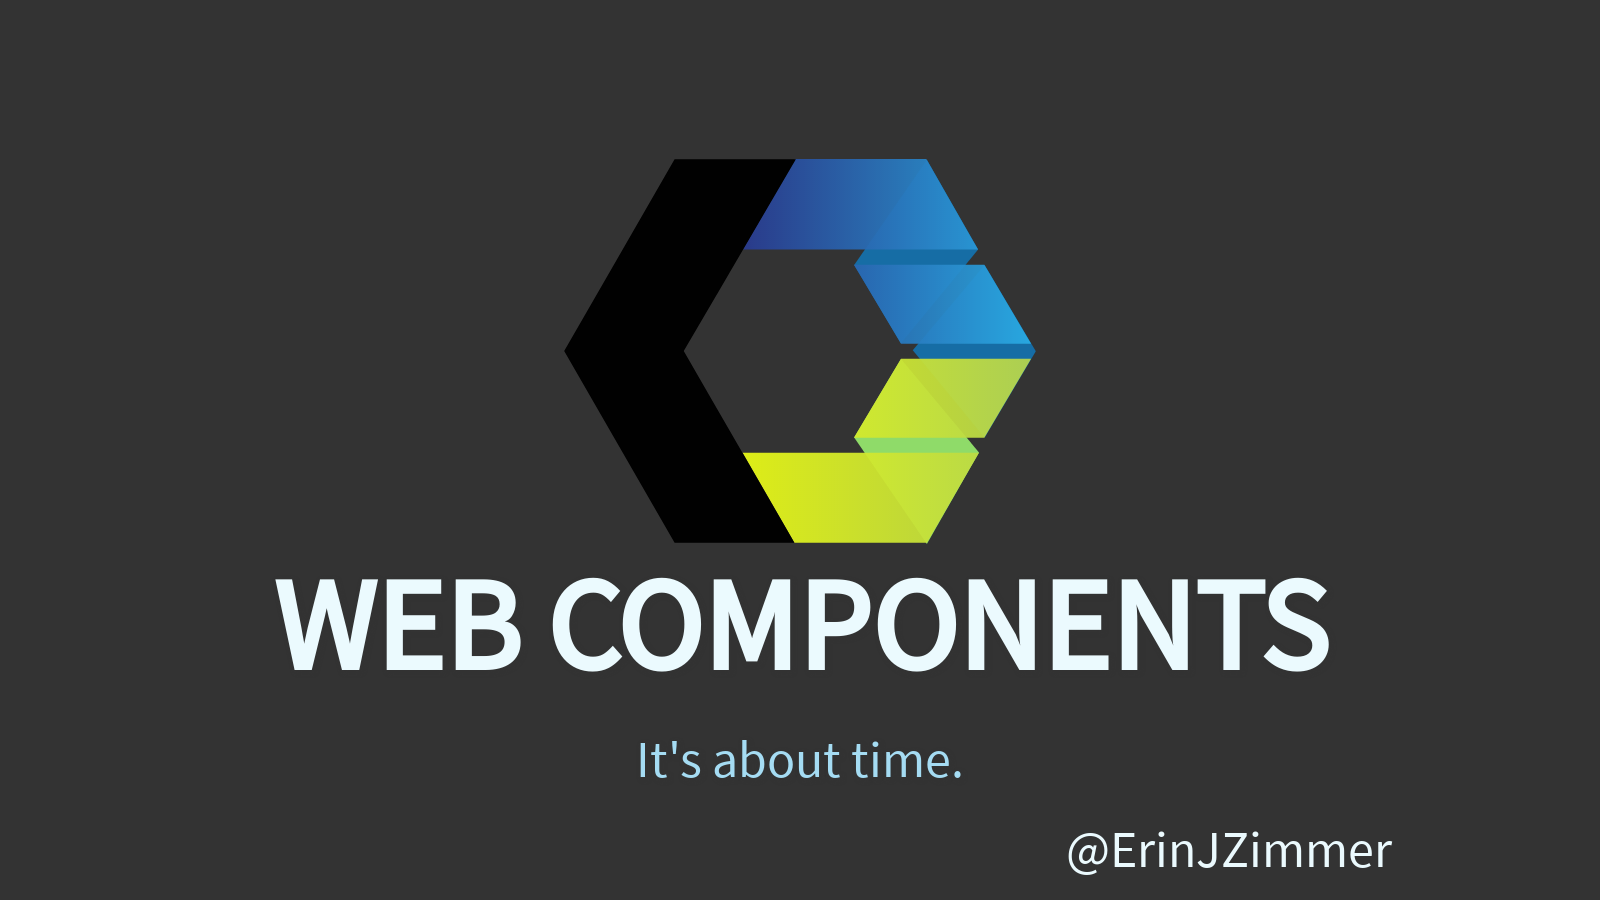 Web Components. It’s about time.